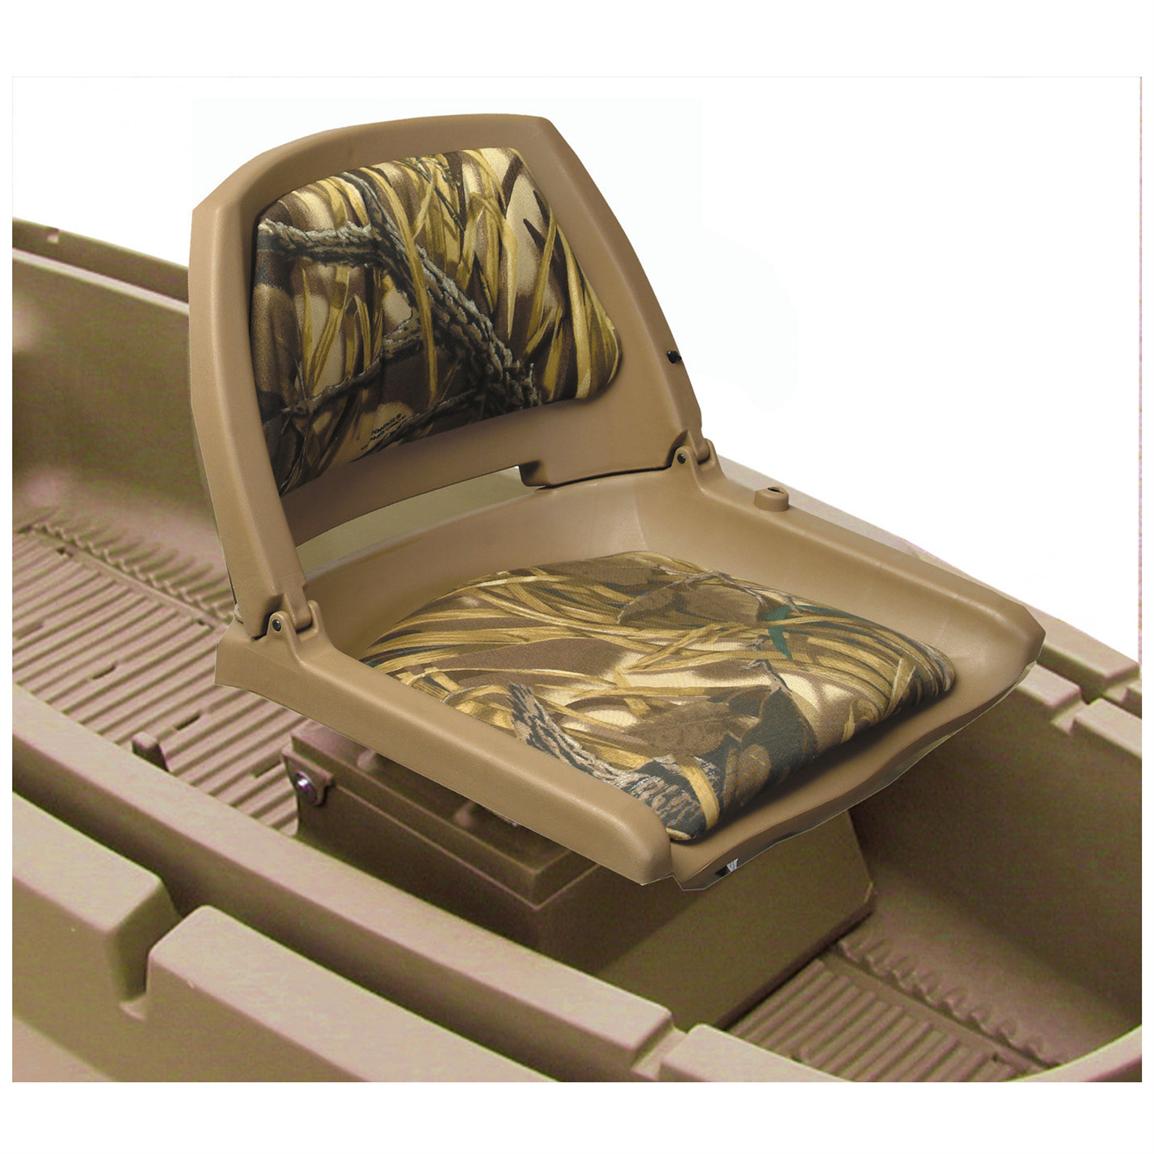 Beavertail Stealth Replacement Battery Box and Seat Box Cover Stealth 1200 and 2000 Sneak Boat Replacement Battery and Seat Box Cover